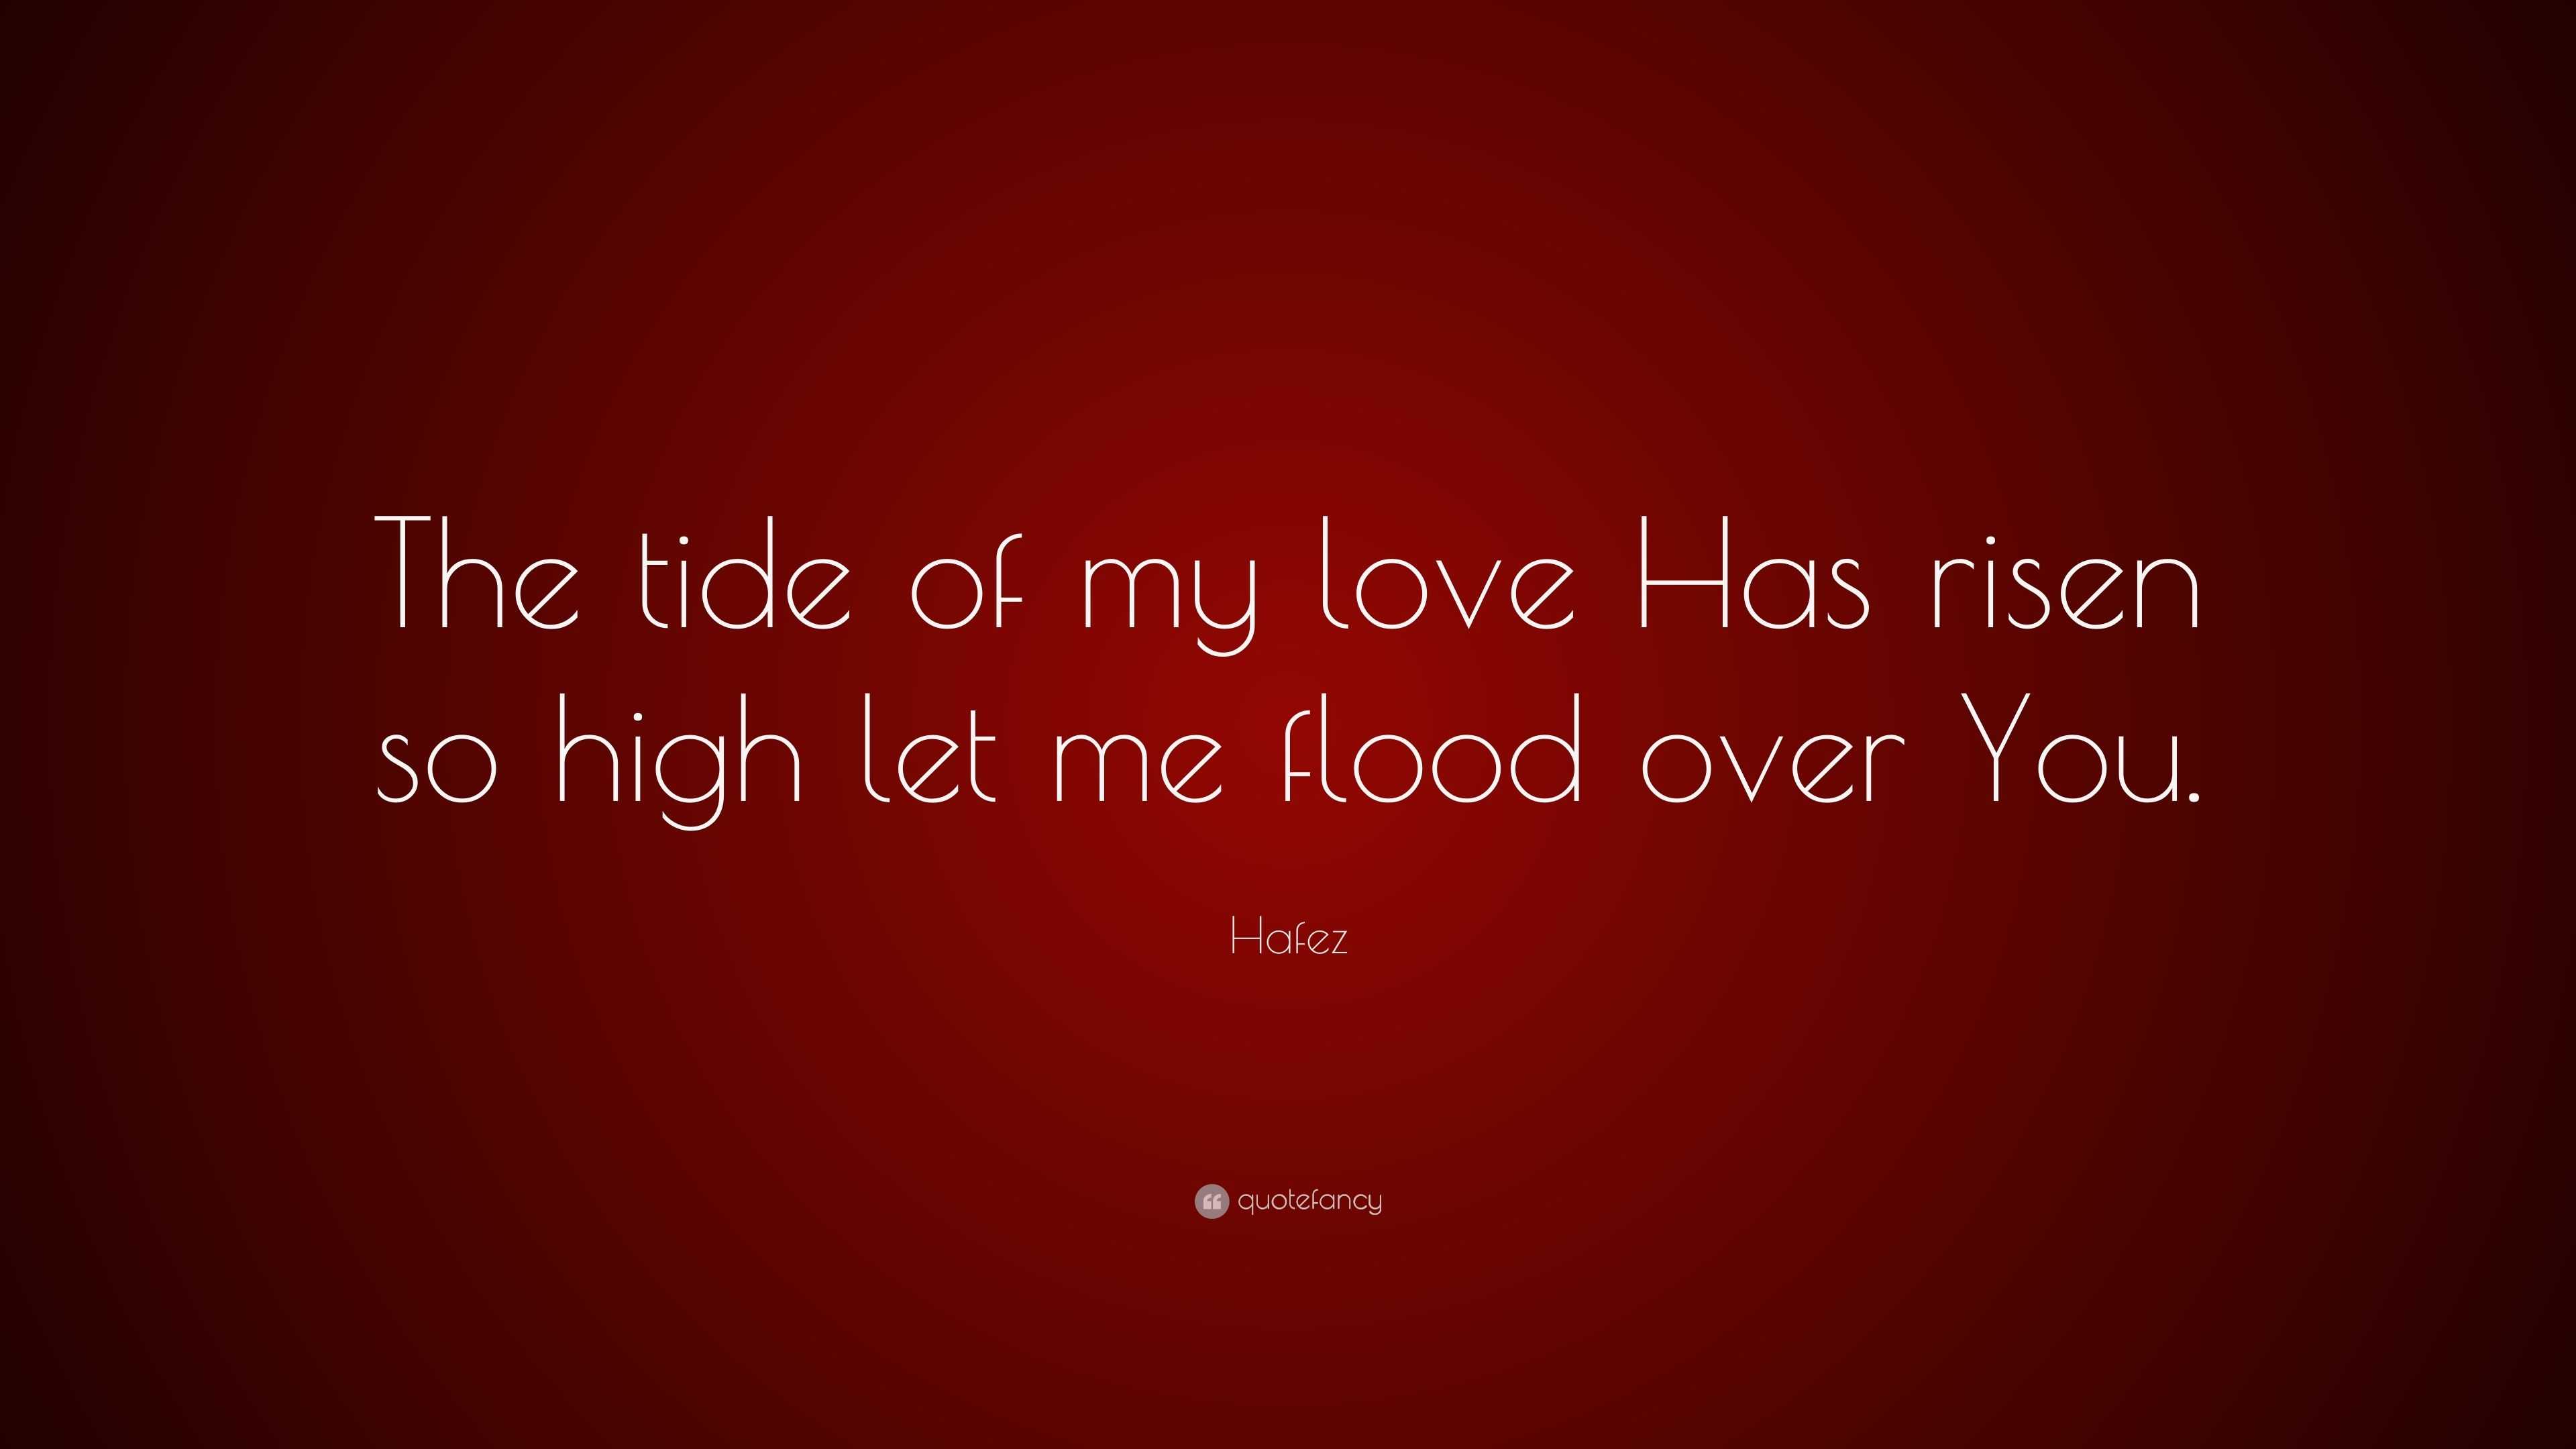 Hafez Quote: “The tide of my love Has risen so high let me flood over You.”